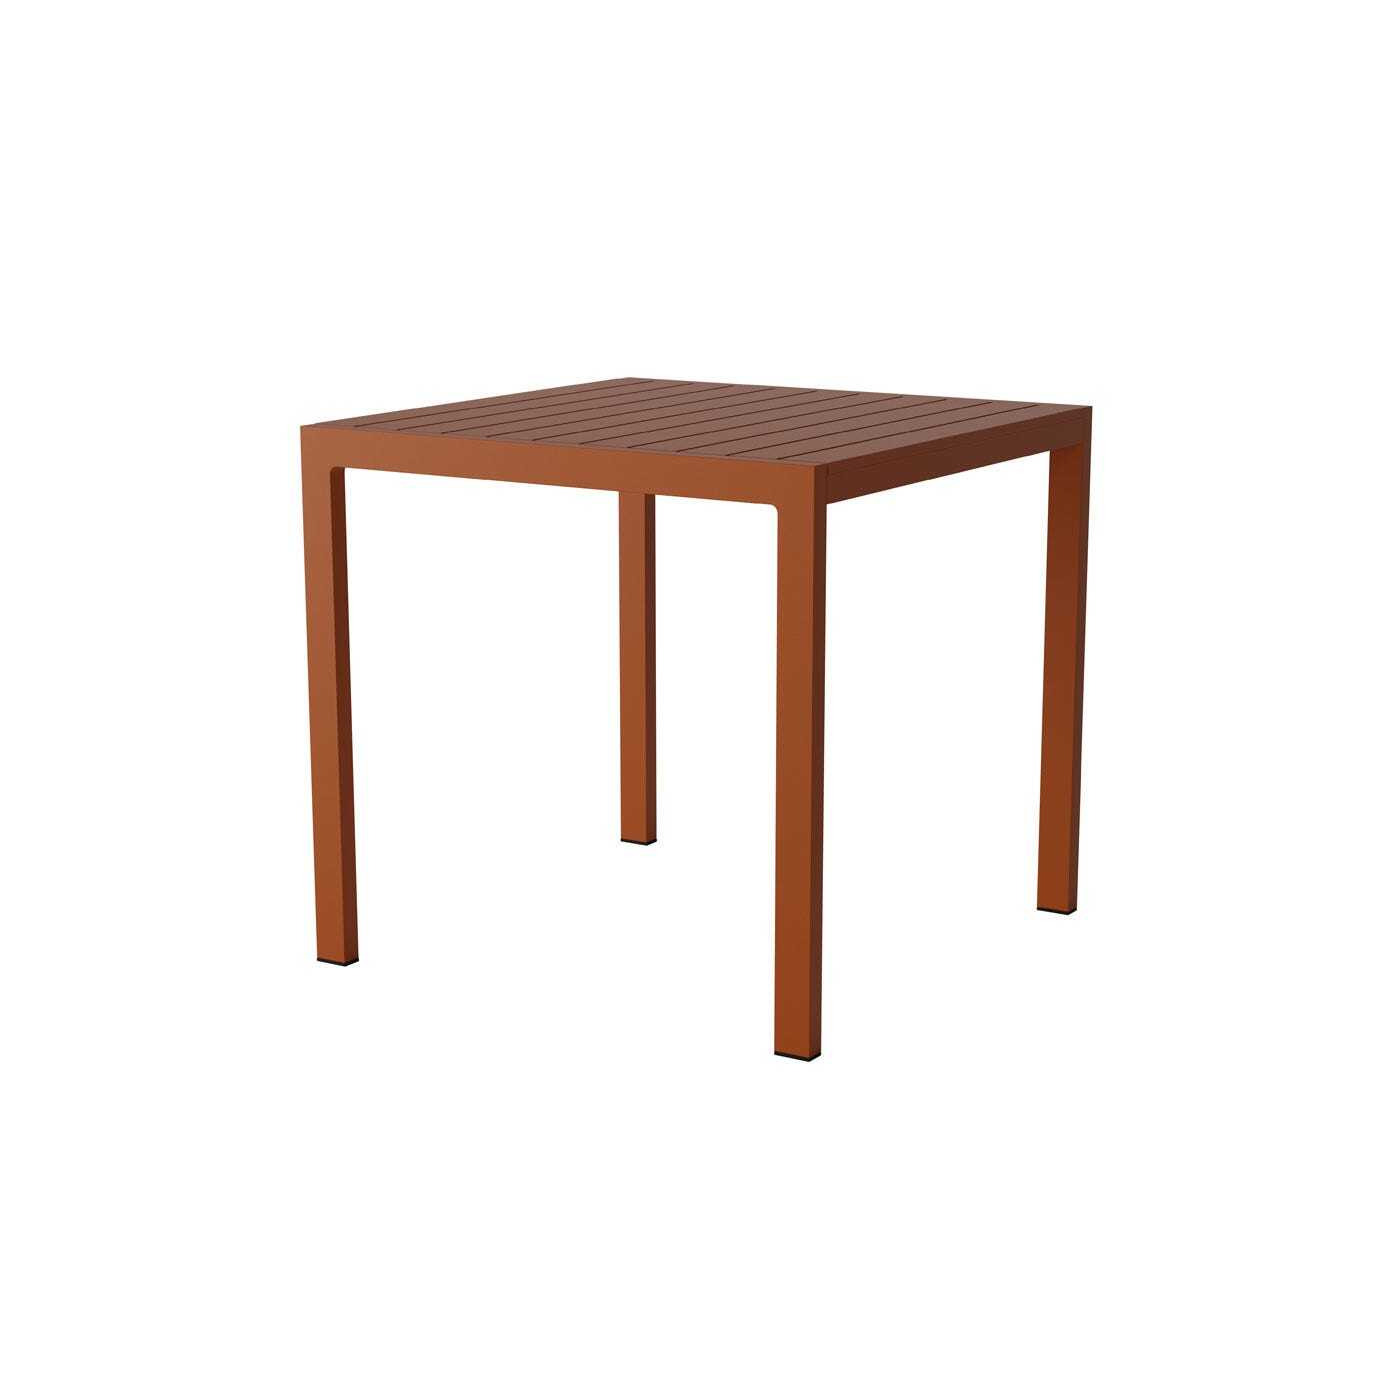 Case Eos Square Outdoor Dining Table Rust - image 1